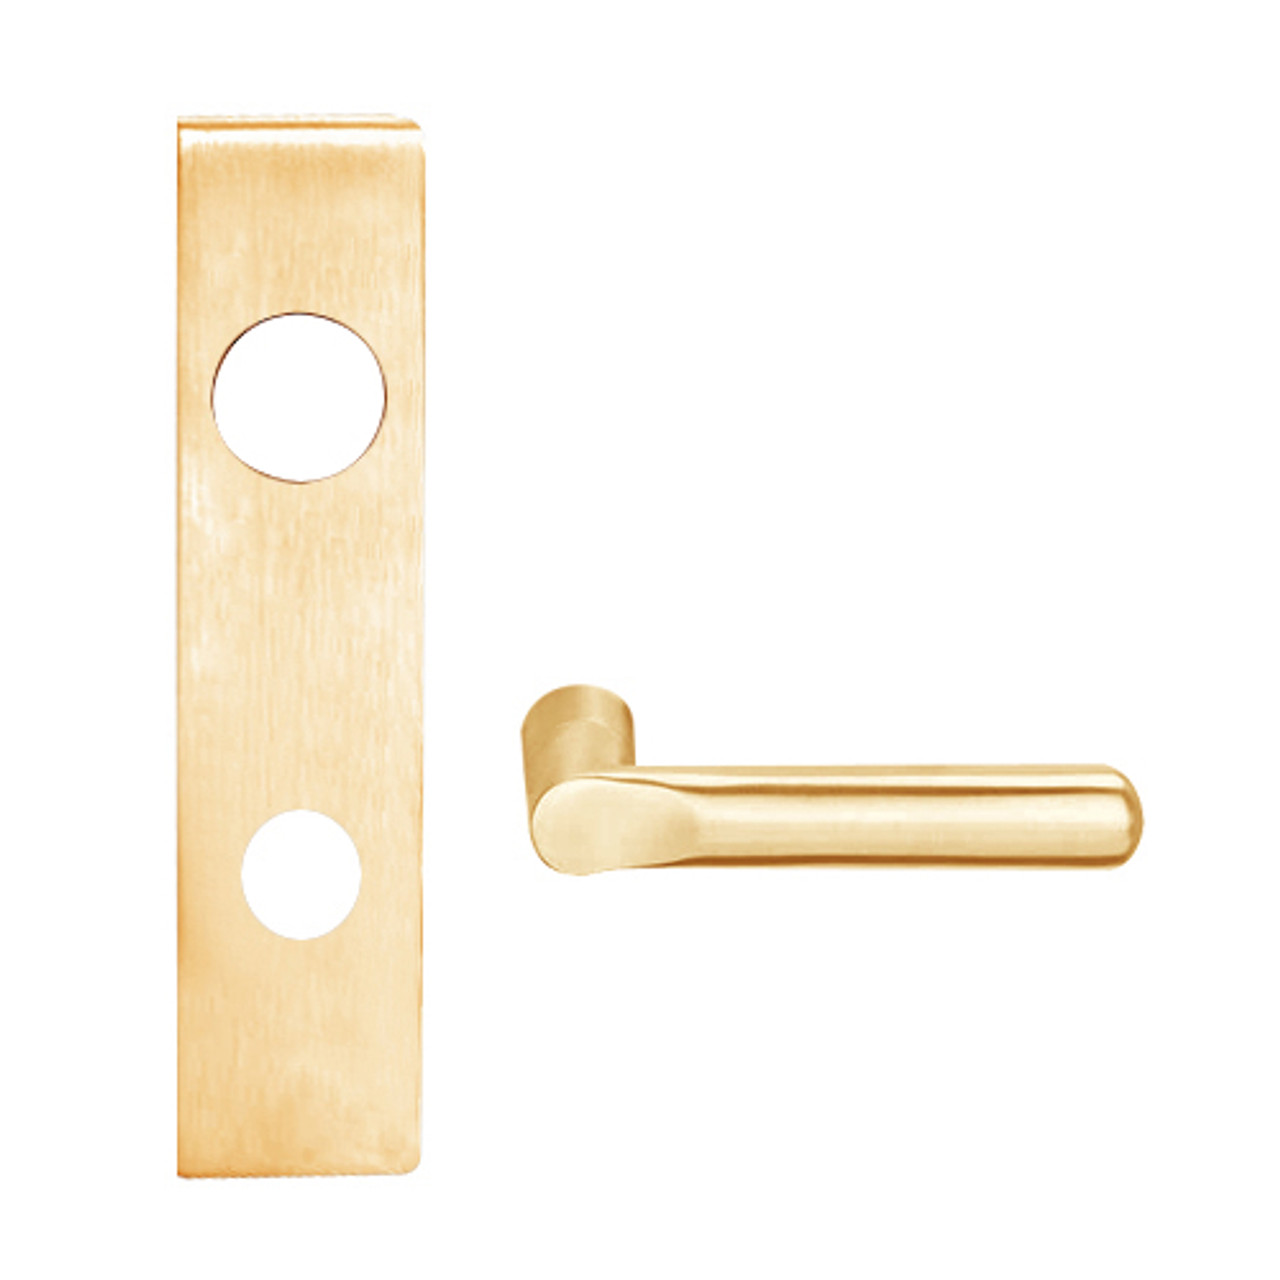 L9050R-18L-612 Schlage L Series Entrance Commercial Mortise Lock with 18 Cast Lever Design and Full Size Core in Satin Bronze